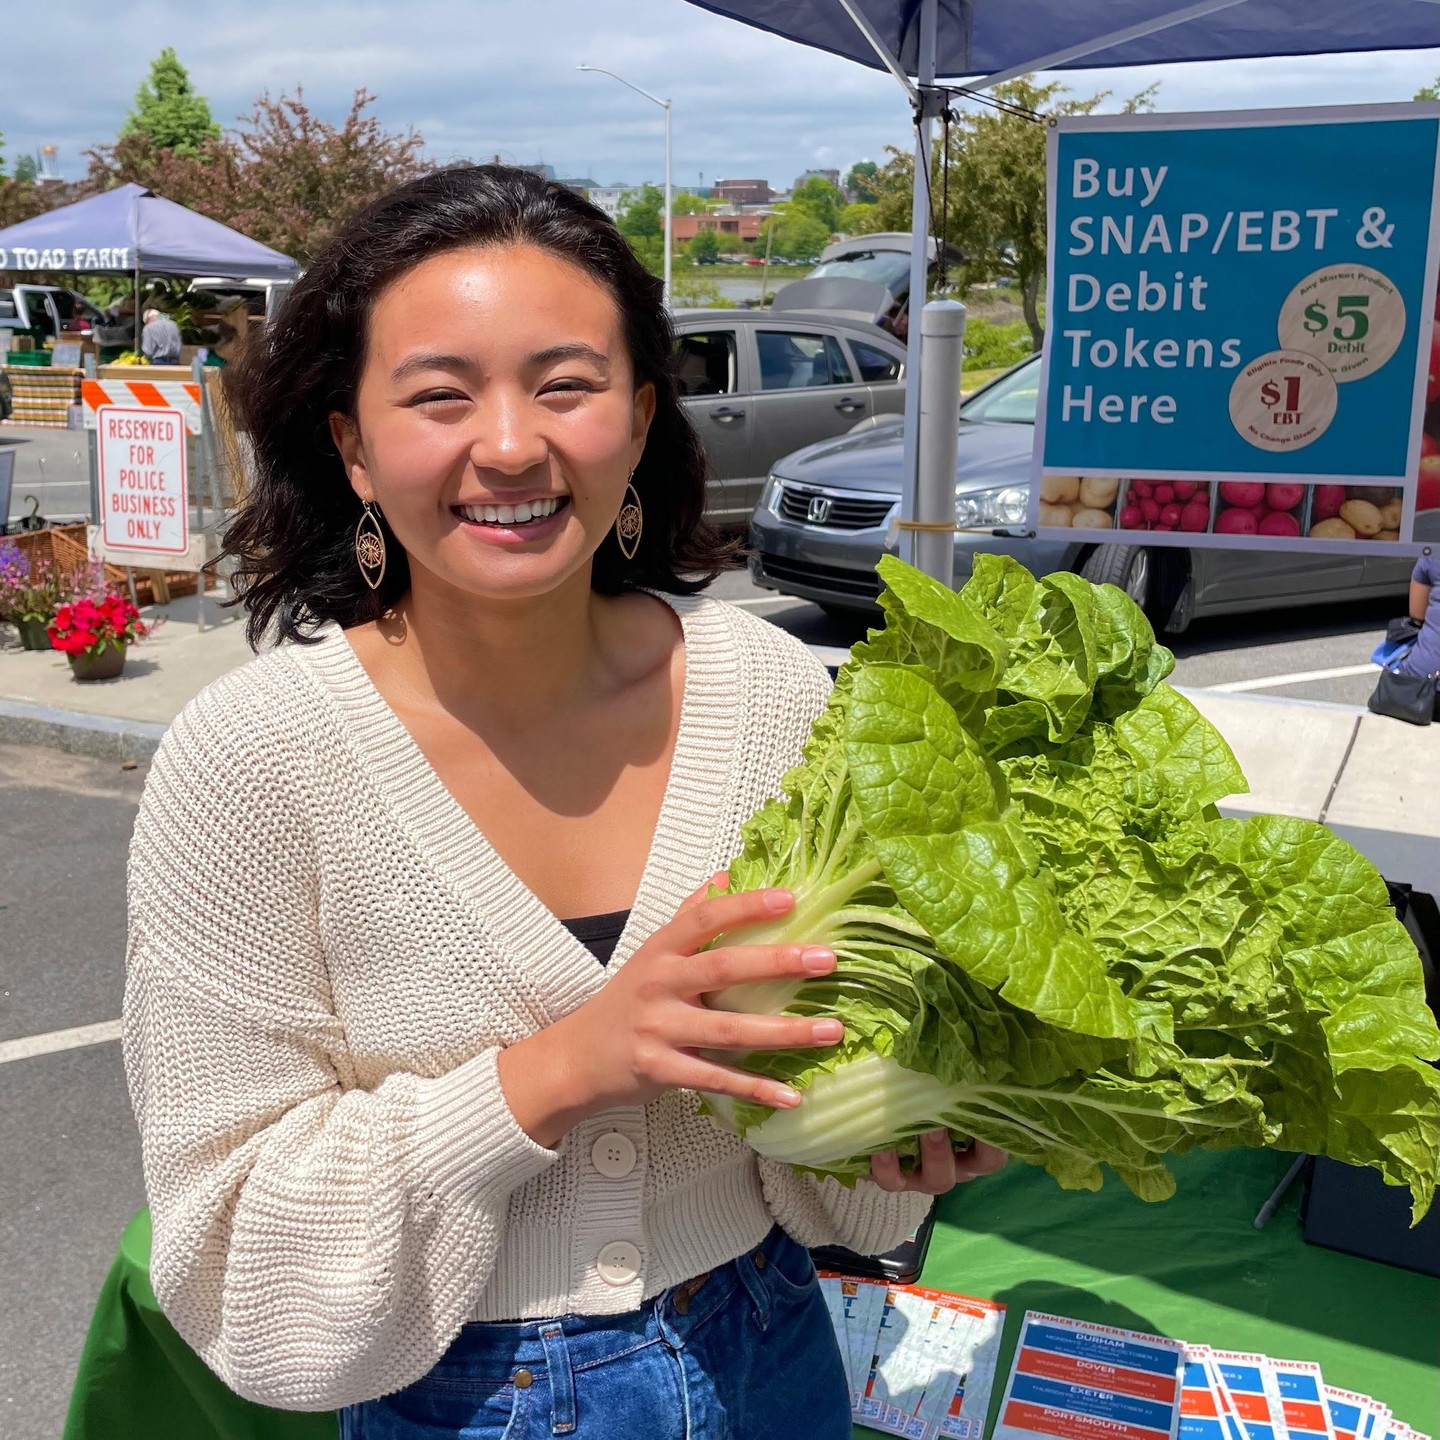 Please join us in welcoming Naomi to the SEL team!

Naomi is working as our SNAP Ambassador while also completing a Masters in Applied Nutrition at New England University. 

As the SNAP Ambassador, Naomi acts as the face of our SNAP and incentive programming at farmers’ markets. She is there to assist SNAP customers in utilizing their benefits at the markets and acts as a point of knowledge to answer questions about our program for the community.

In Naomi's words: "You can find me at the Portsmouth, Exeter, and Rochester farmers’ markets. When I’m not processing SNAP/EBT transactions, I’ve really enjoyed meandering around the market and meeting the vendors we have this summer! Transitioning to this role has been so easy thanks to the wonderful people that attend our markets! Everyone has been so welcoming."

We're so glad you are here, Naomi! 

#newstaff 
#farmersmarket 
#marketmanager 
#eatvegetables
#healthyfood
#localfood 
#seacoastnh 
#funinthesun 
#snap 
#ebt 
#foodjustice 
#foodaccess